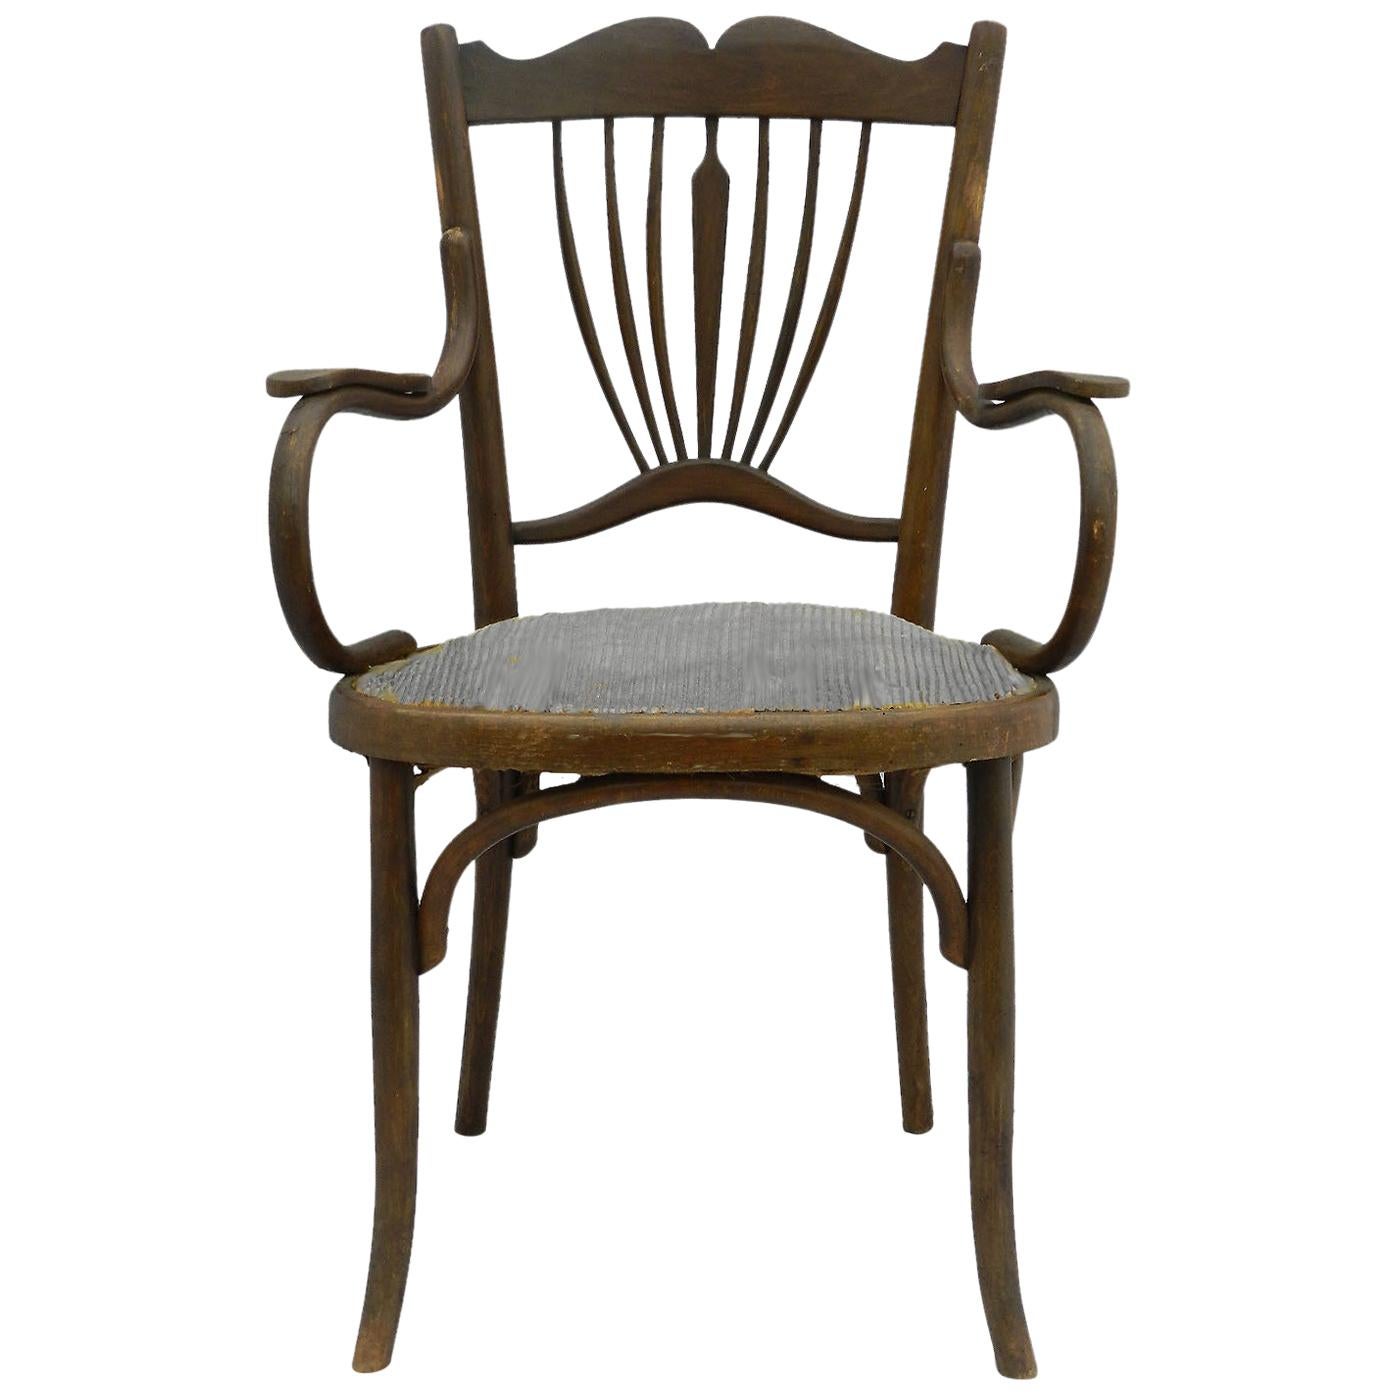 Art Nouveau Bentwood Armchair Includes Refinishing and Recovering, circa 1900